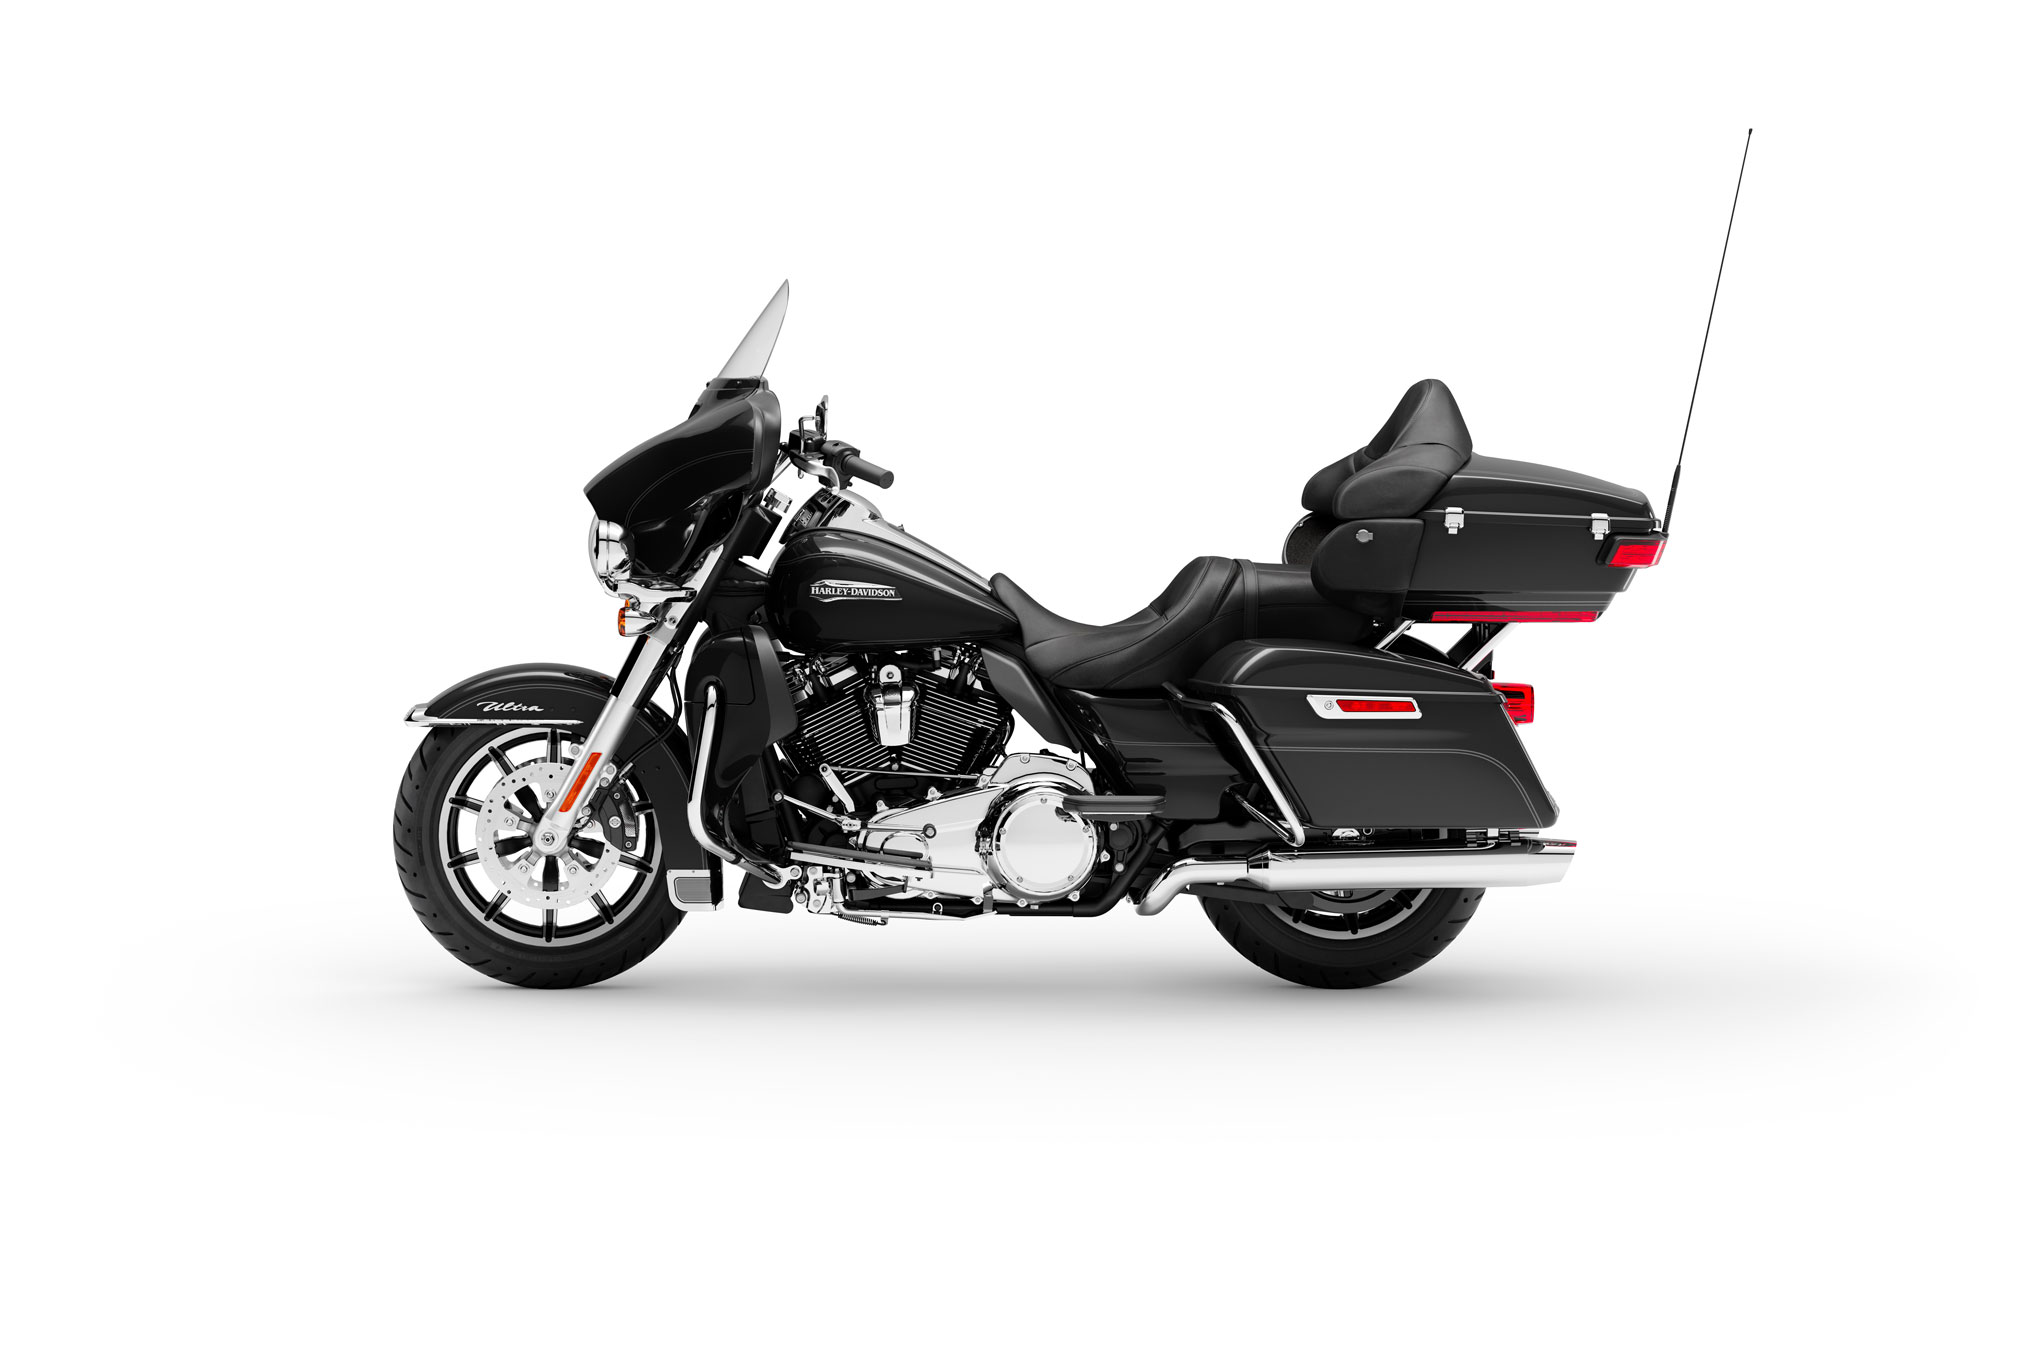 2019 Harley Davidson Electra Glide Ultra Classic Guide Total Motorcycle